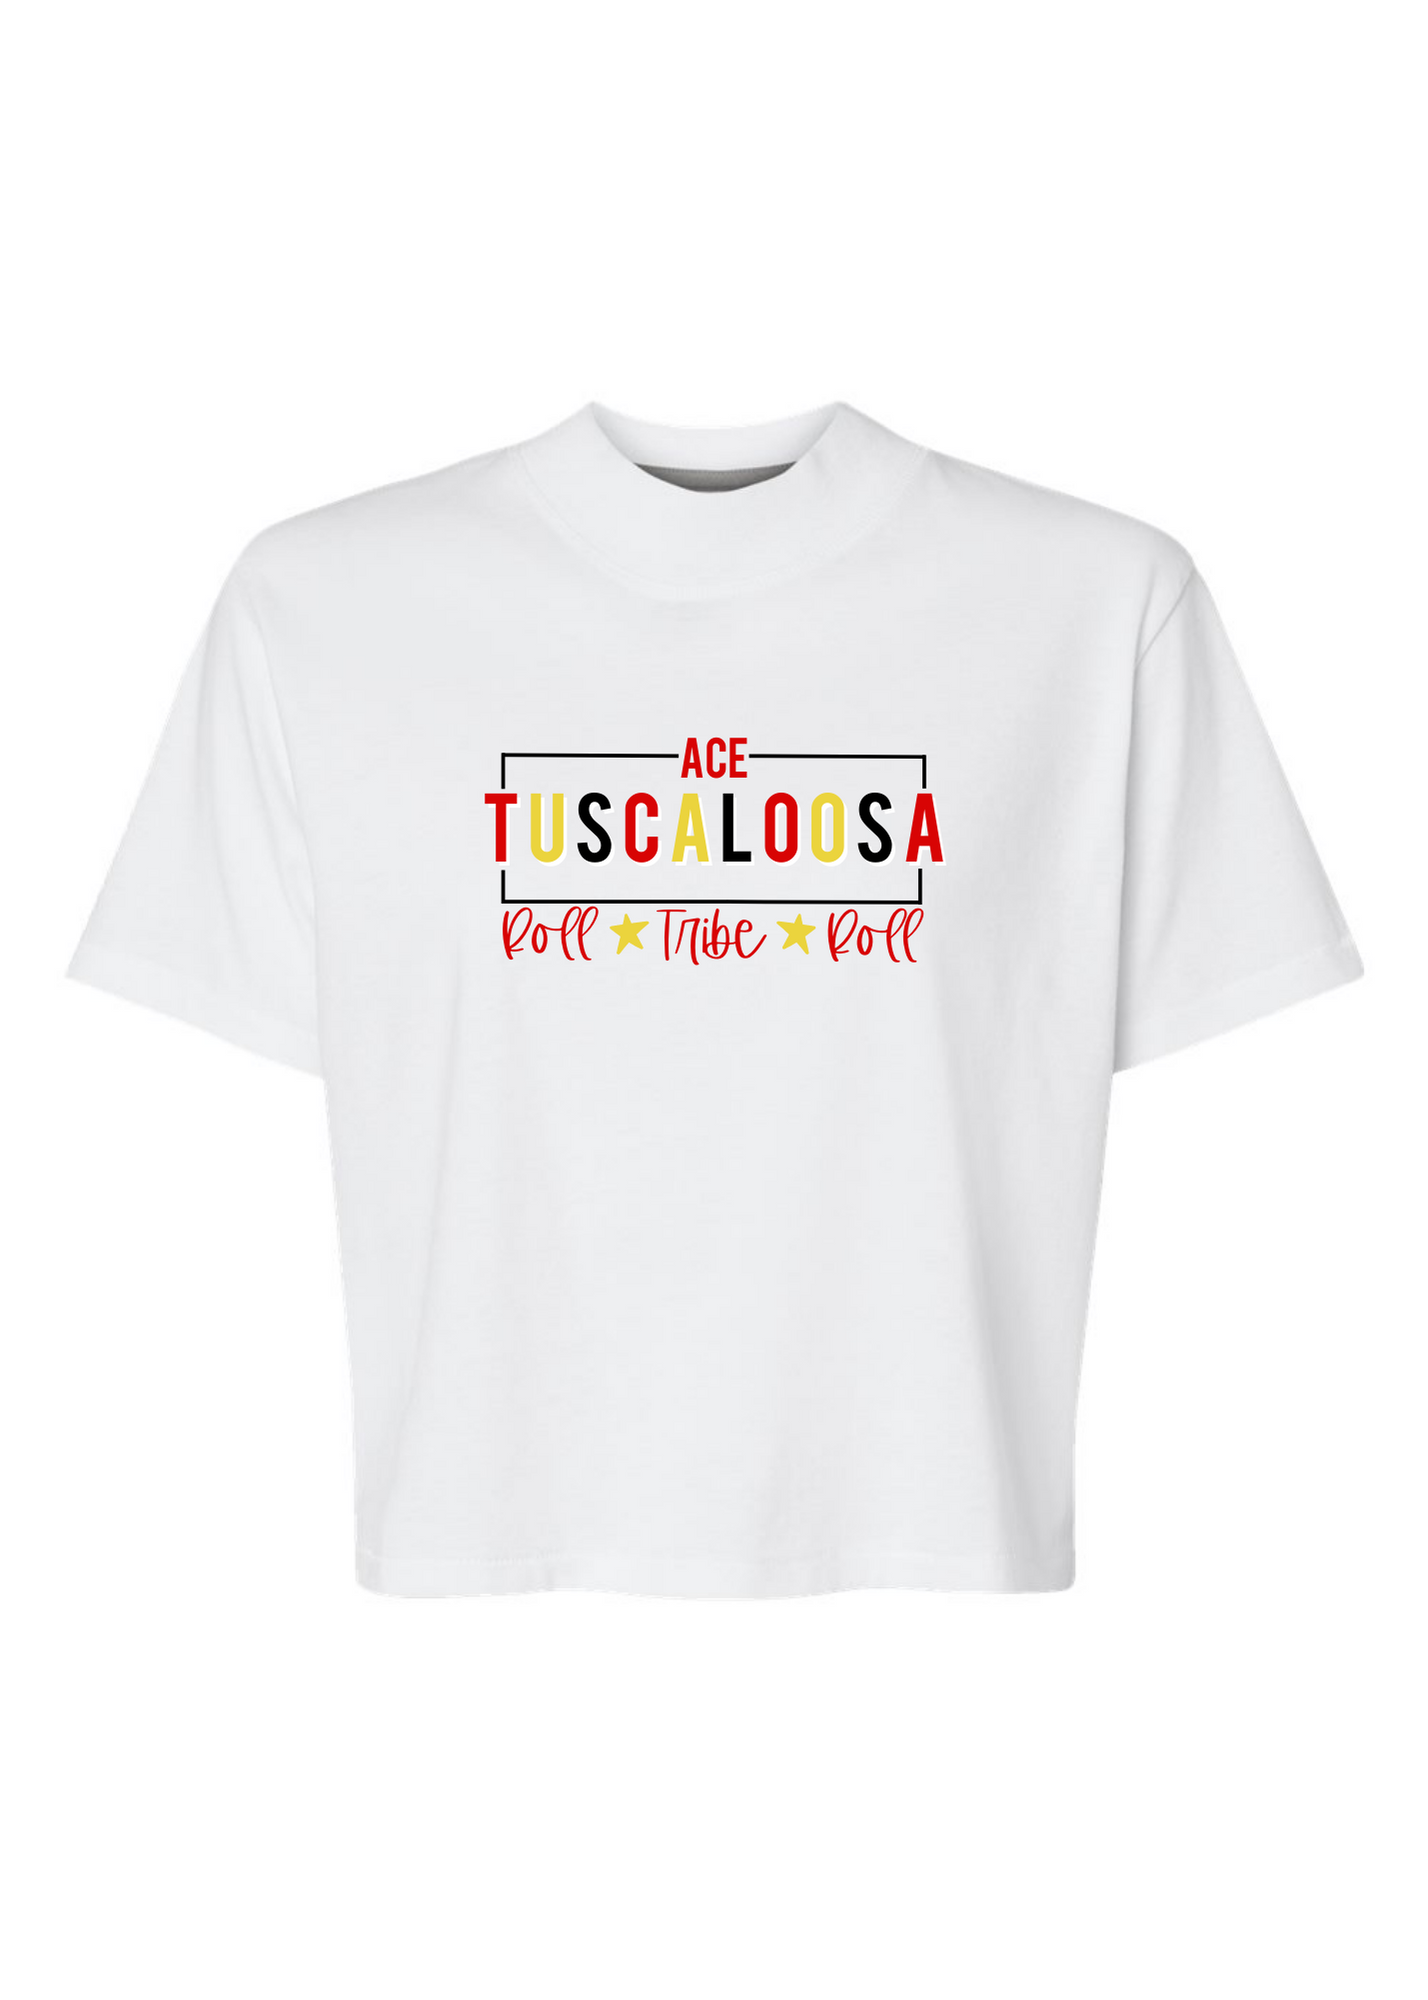 ACE Tuscaloosa | Mom Crop Tee | Adult-Sister Shirts-Sister Shirts, Cute & Custom Tees for Mama & Littles in Trussville, Alabama.